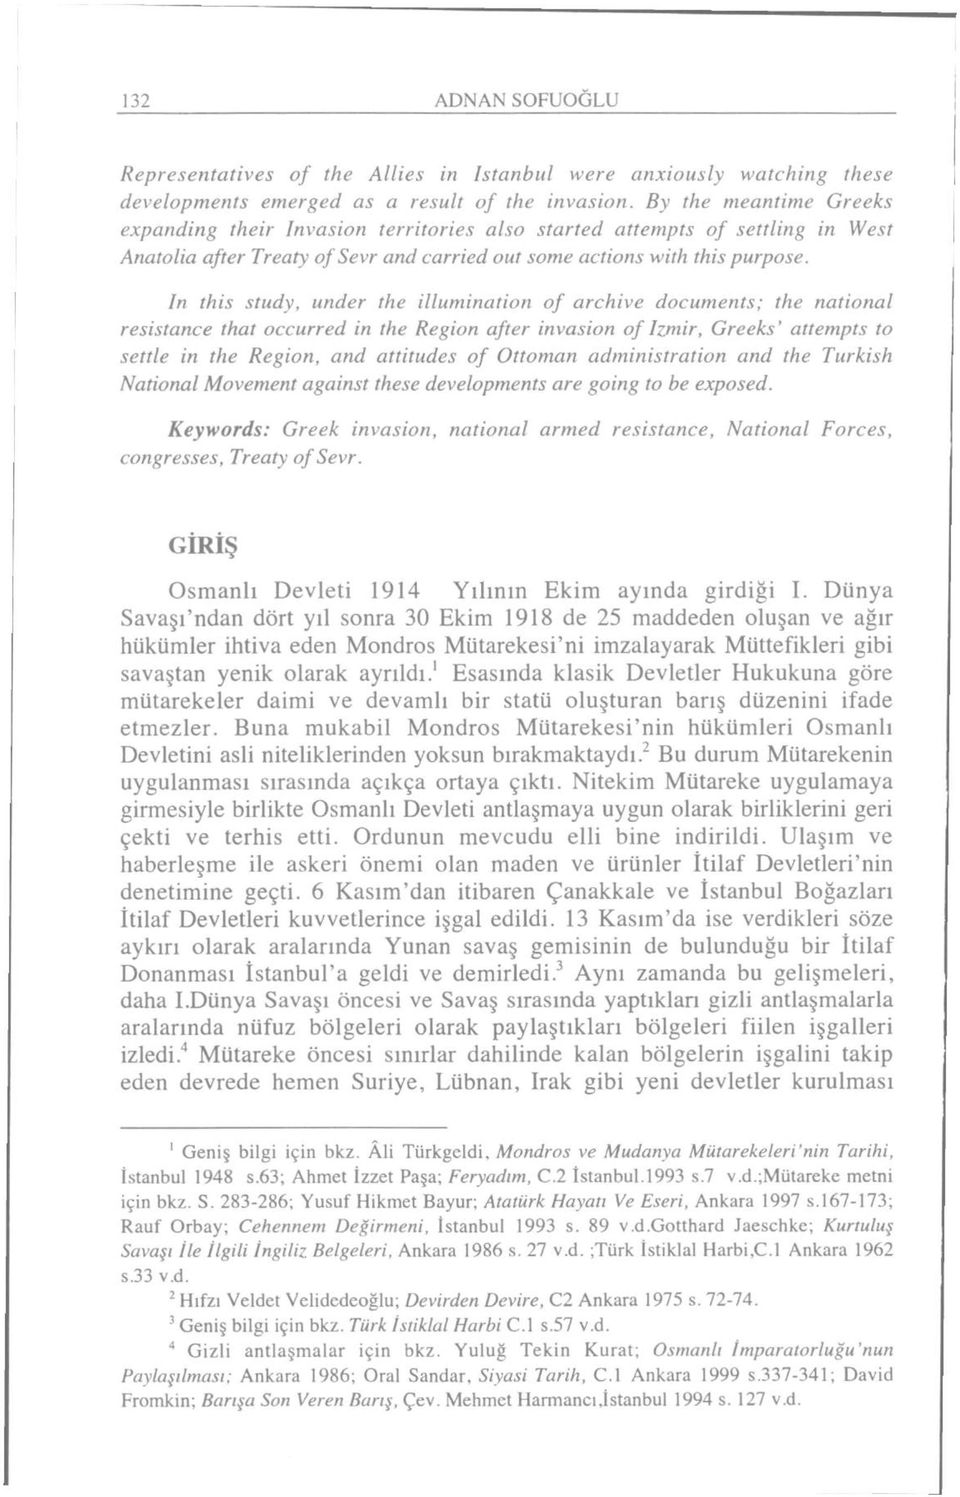 In this study, under the illumination of archive documents; the national resistance that occurred in the Region after invasion of izmir, Greeks' attempts to settle in the Region, and attitudes of